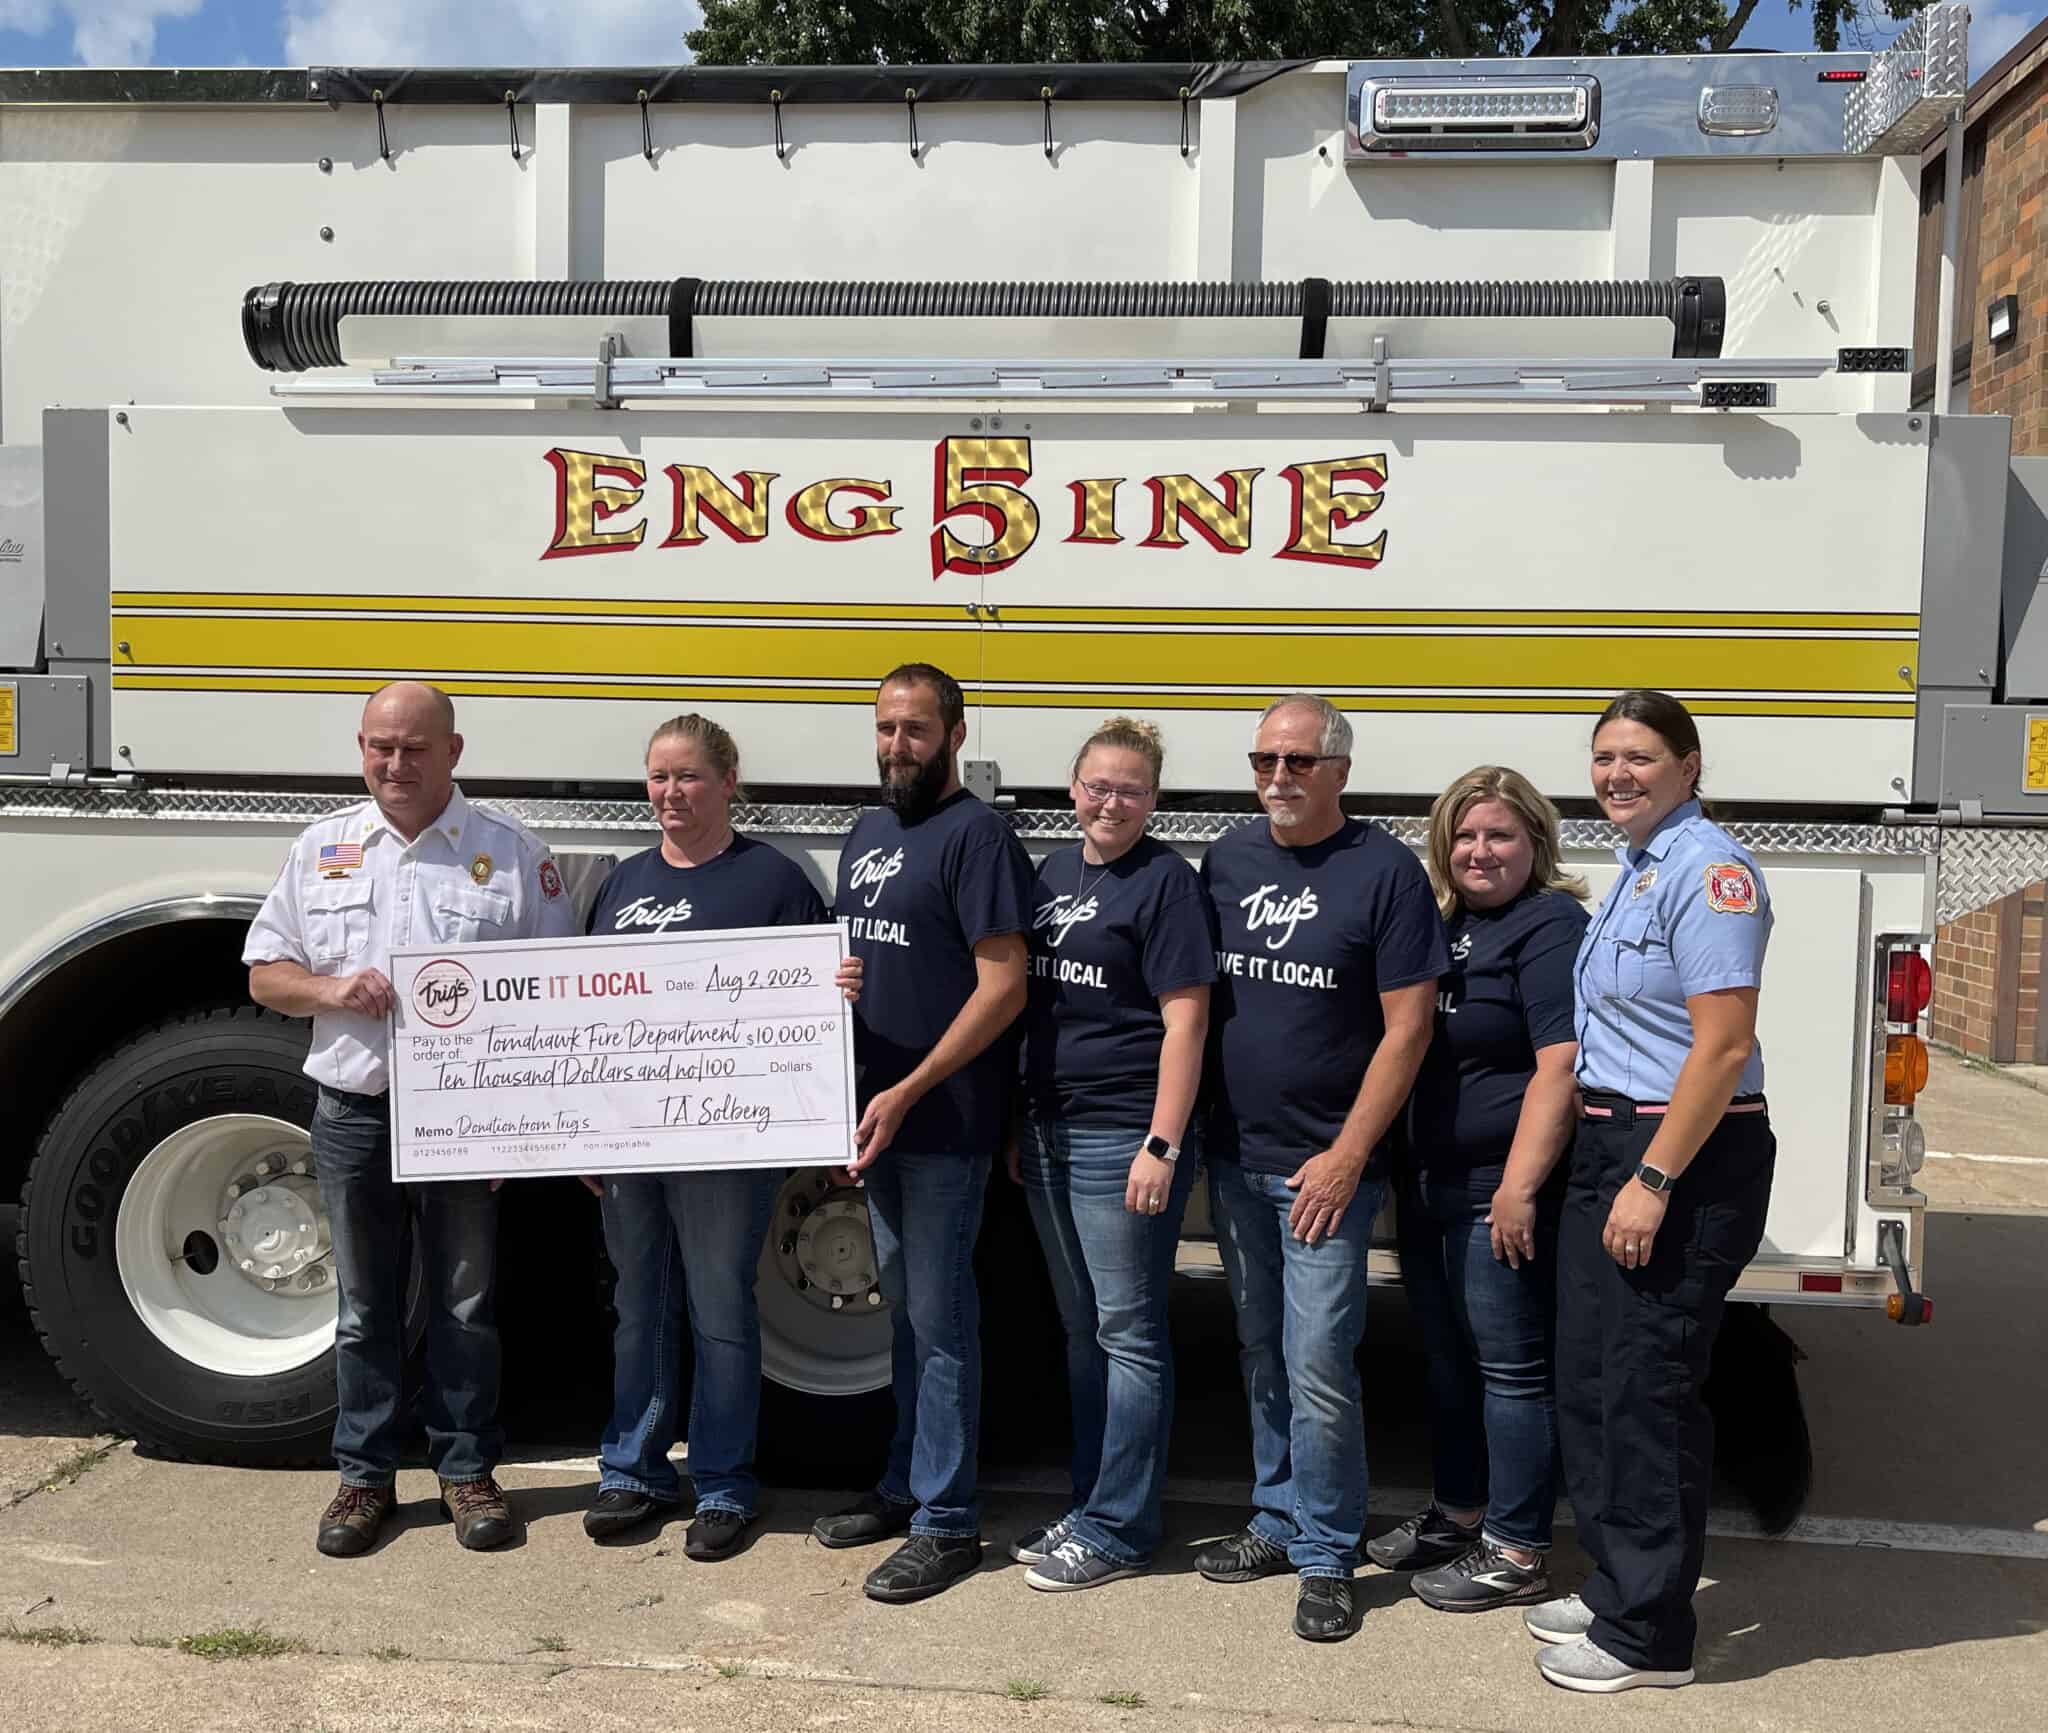 Trig’s donates $10,000.00 to TFD for thermal imaging cameras